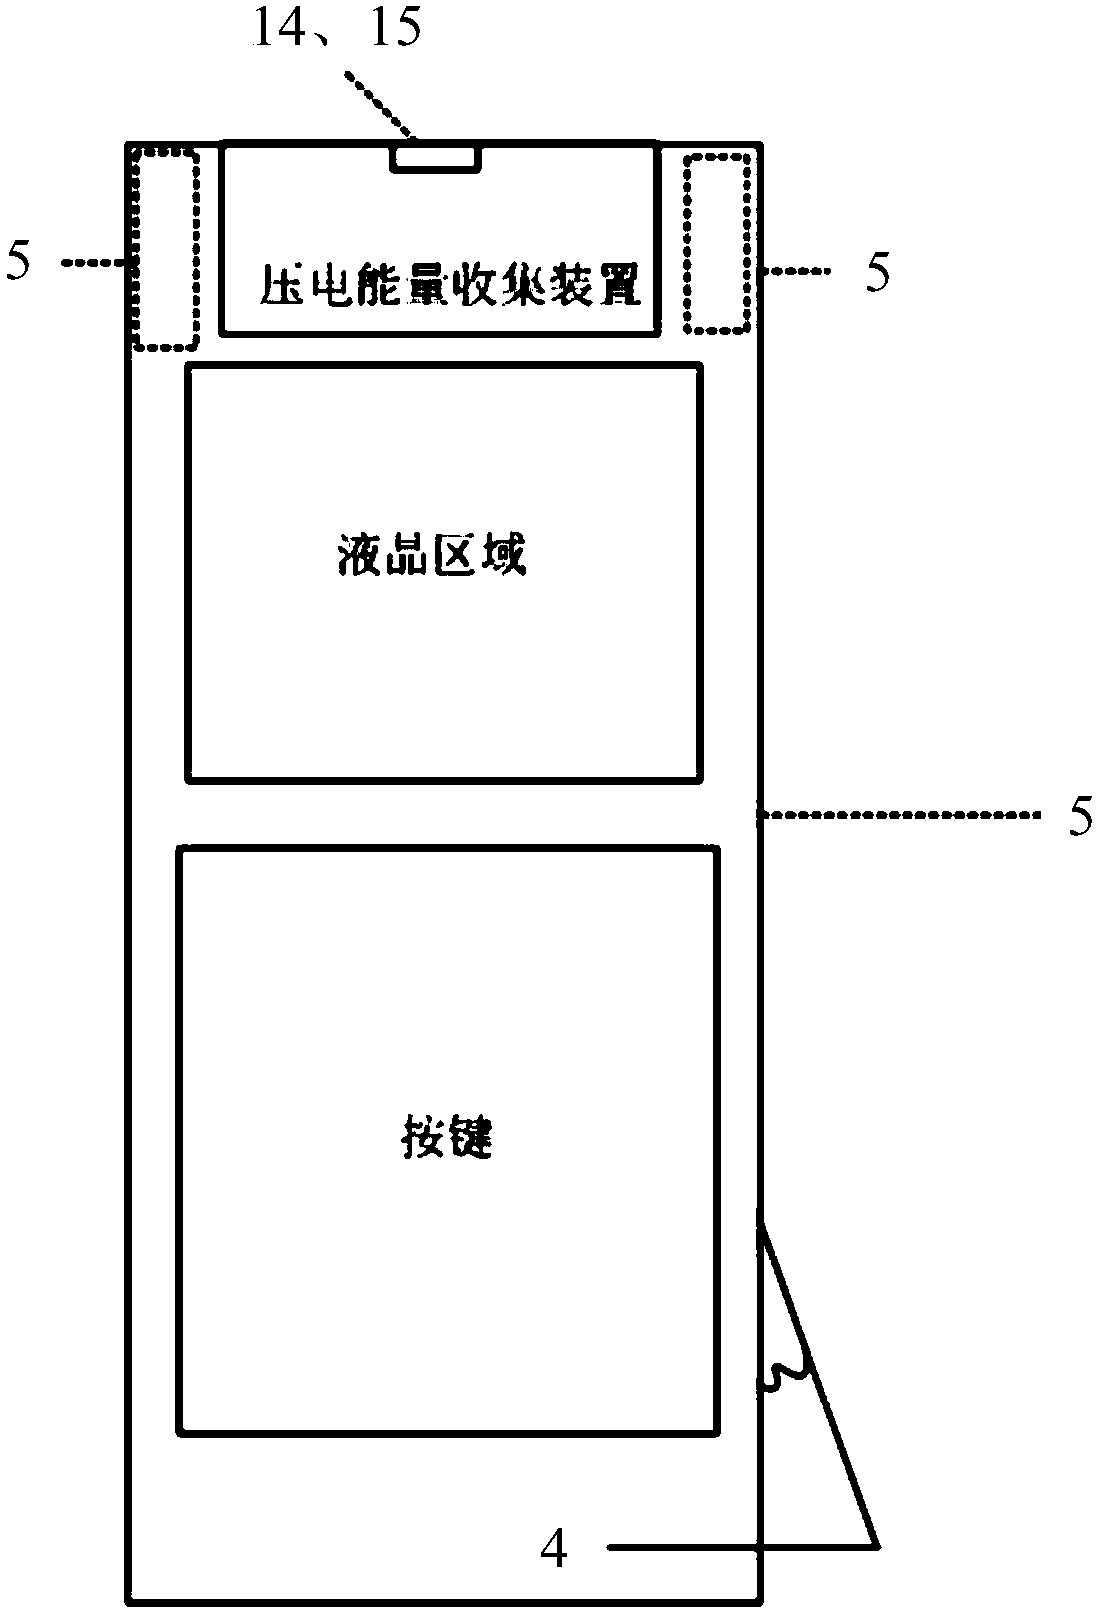 Remote control unit and control method thereof